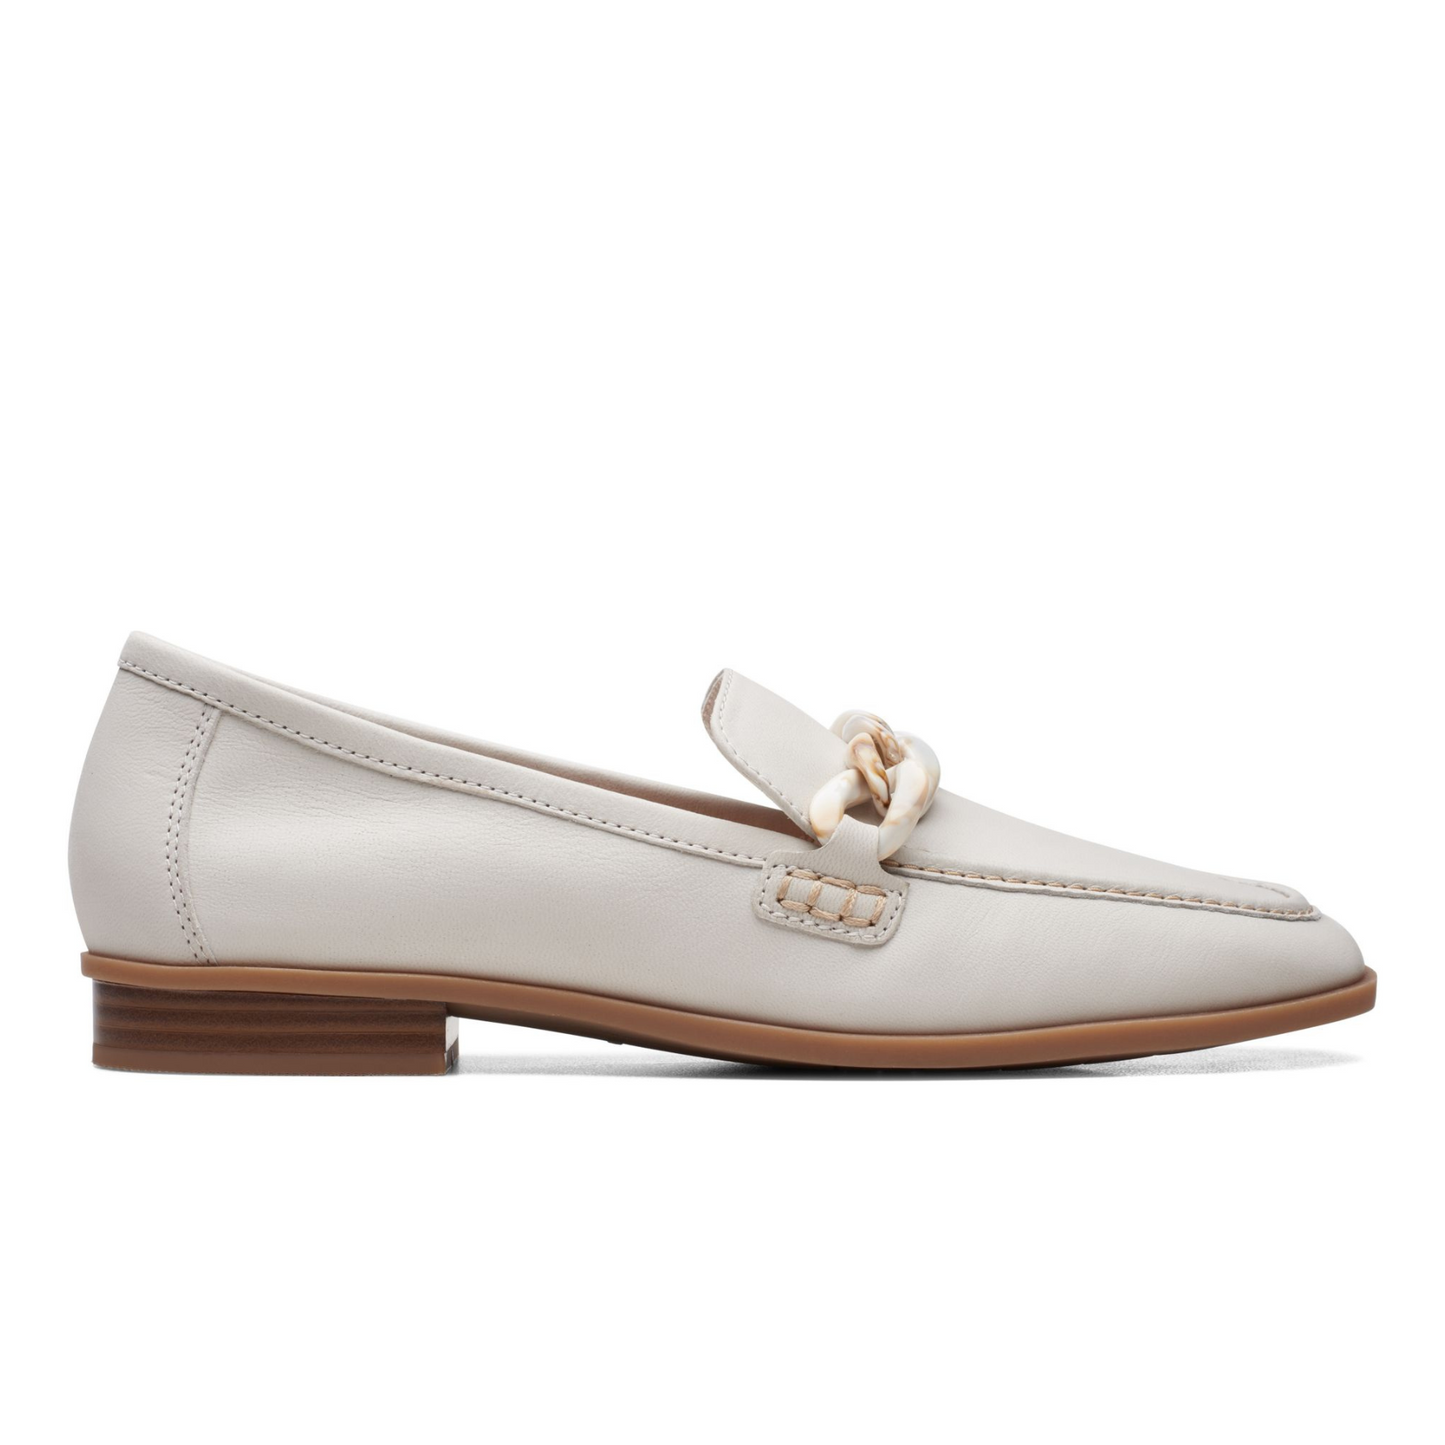 Clarks Sarafyna Iris Loafer - White Leather